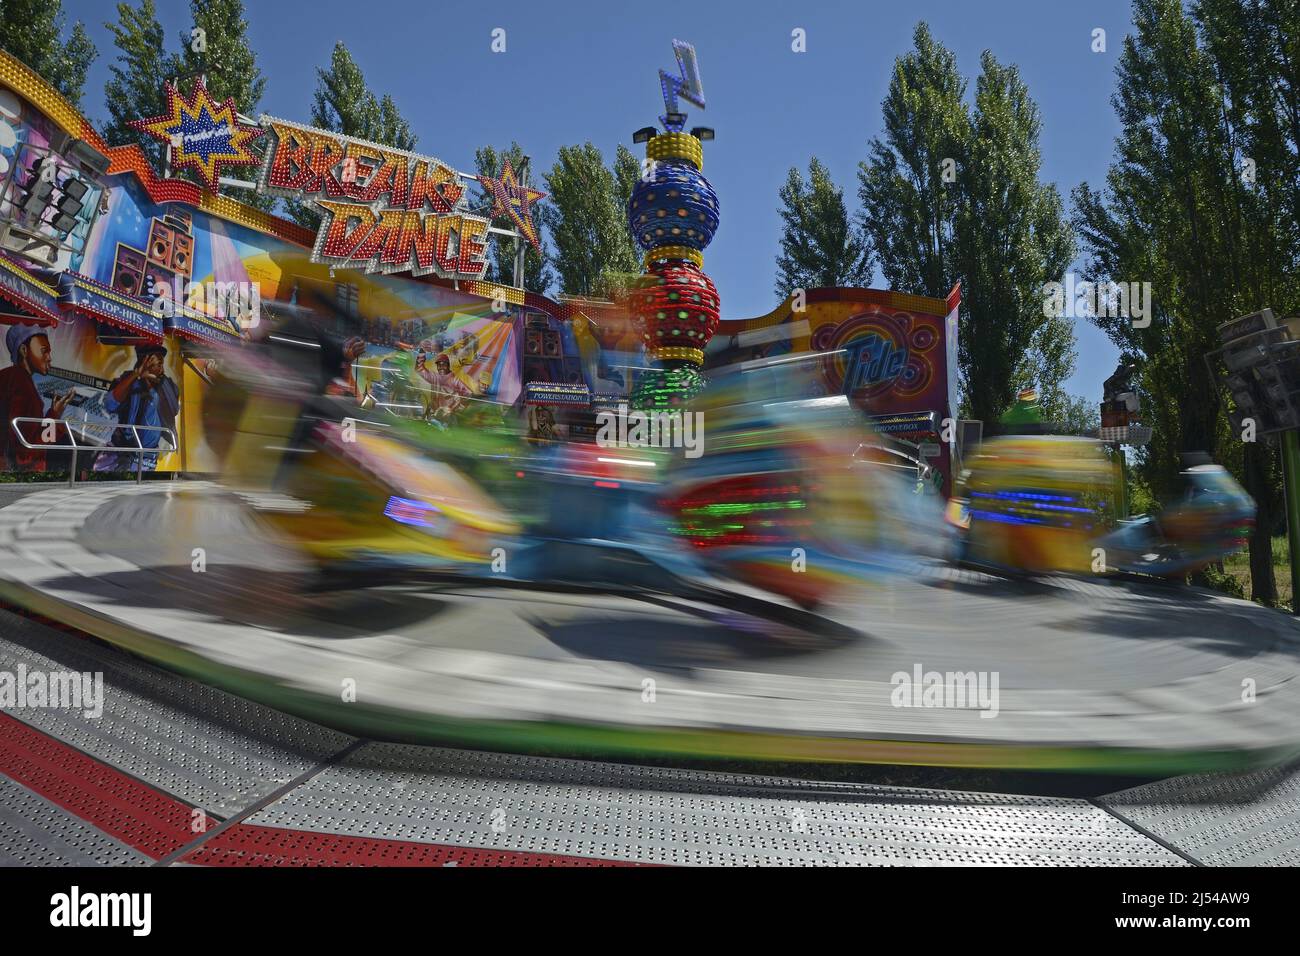 funfair ride at a fair, blurred vision, Germany Stock Photo